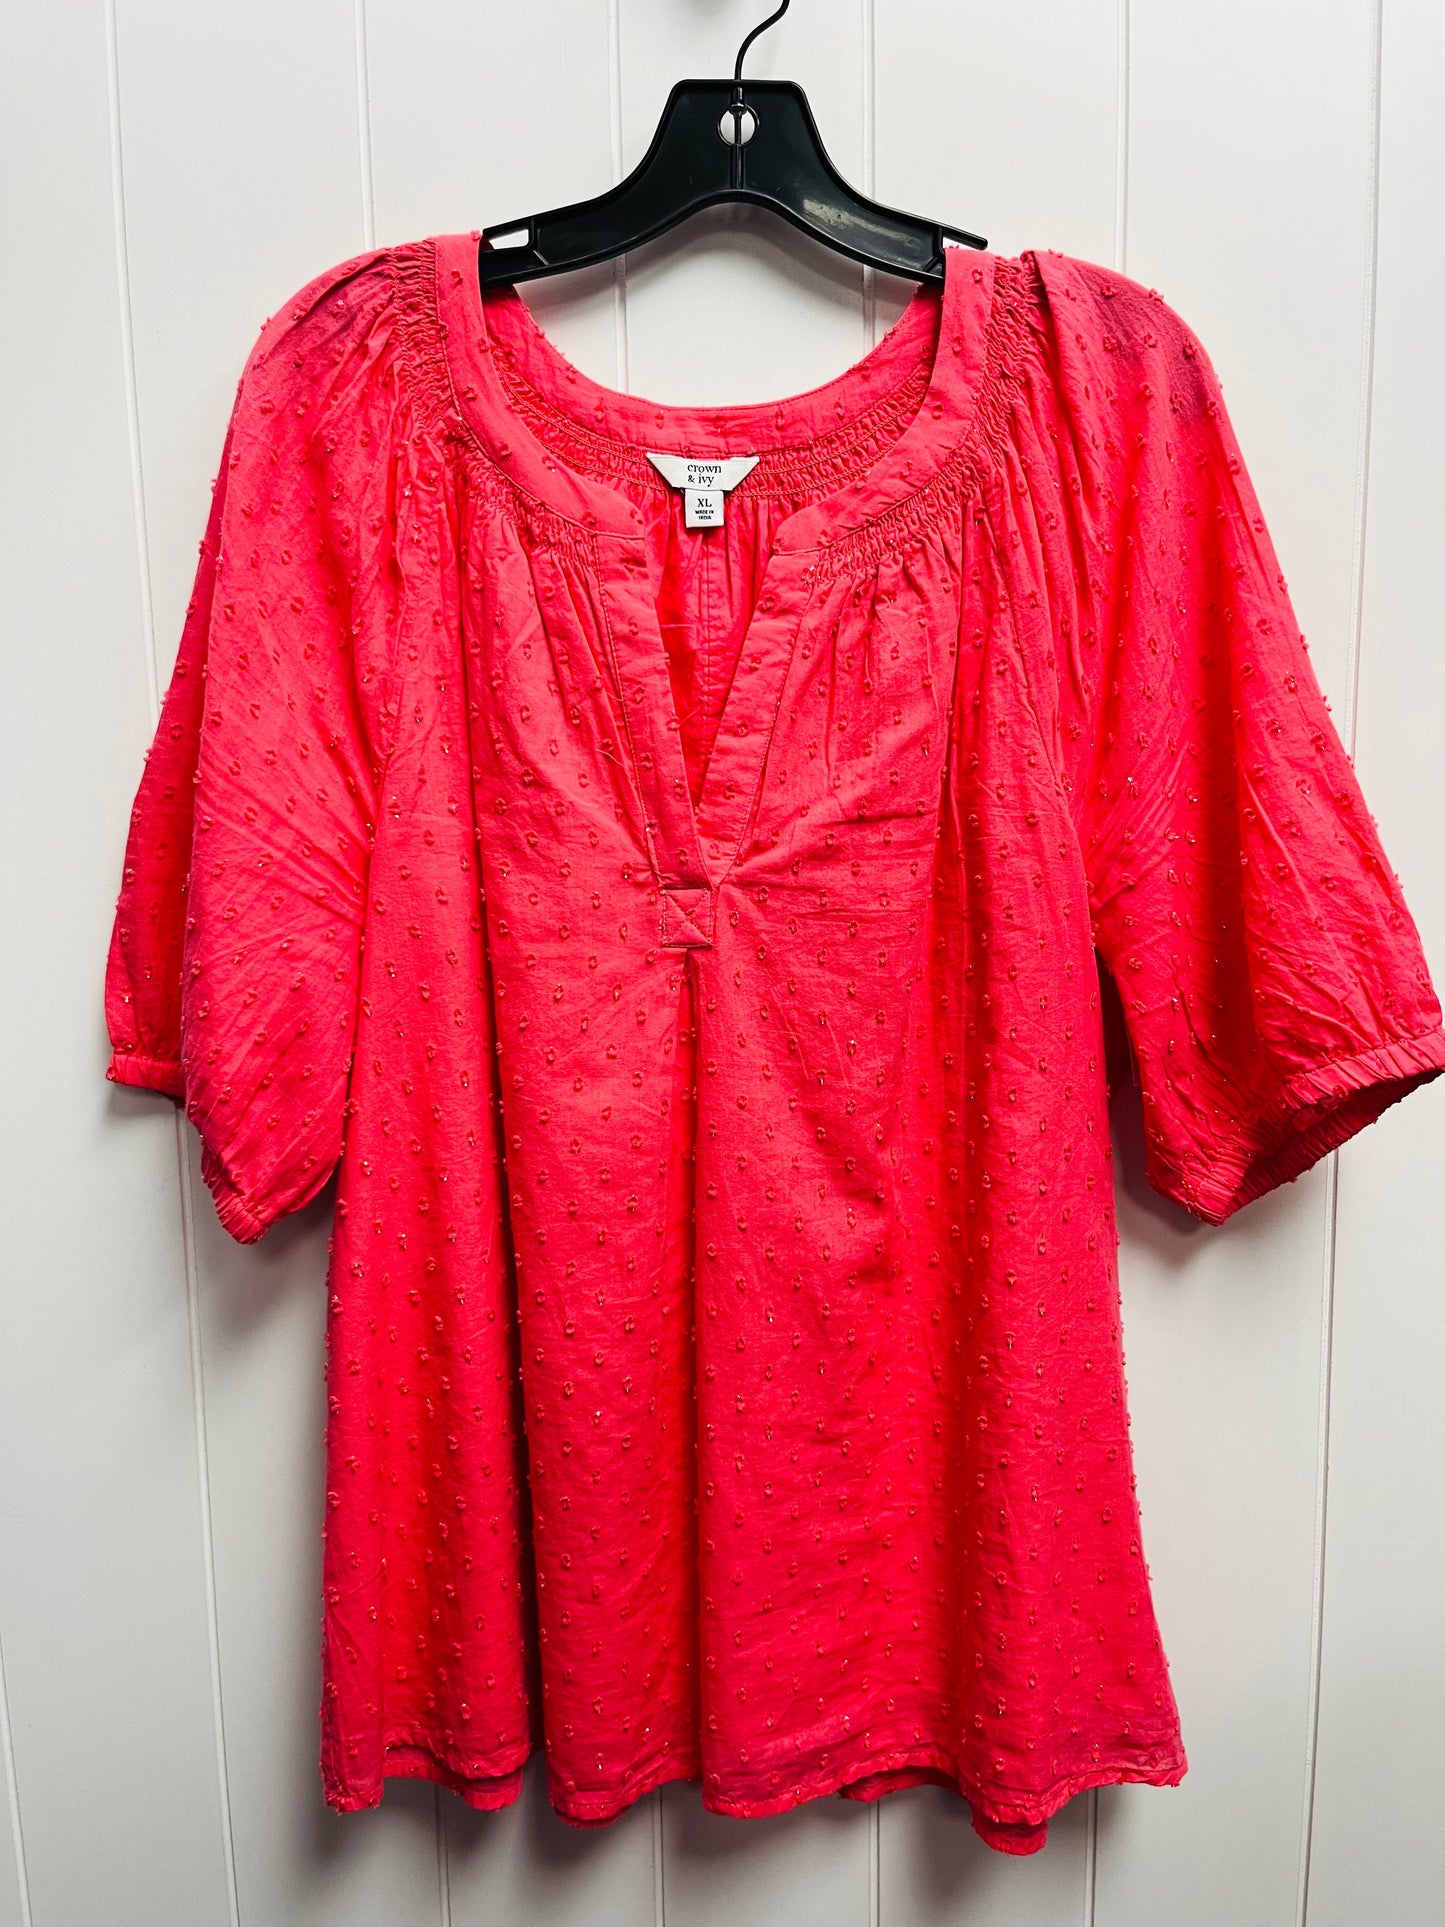 Coral Top Short Sleeve Crown And Ivy, Size Xl